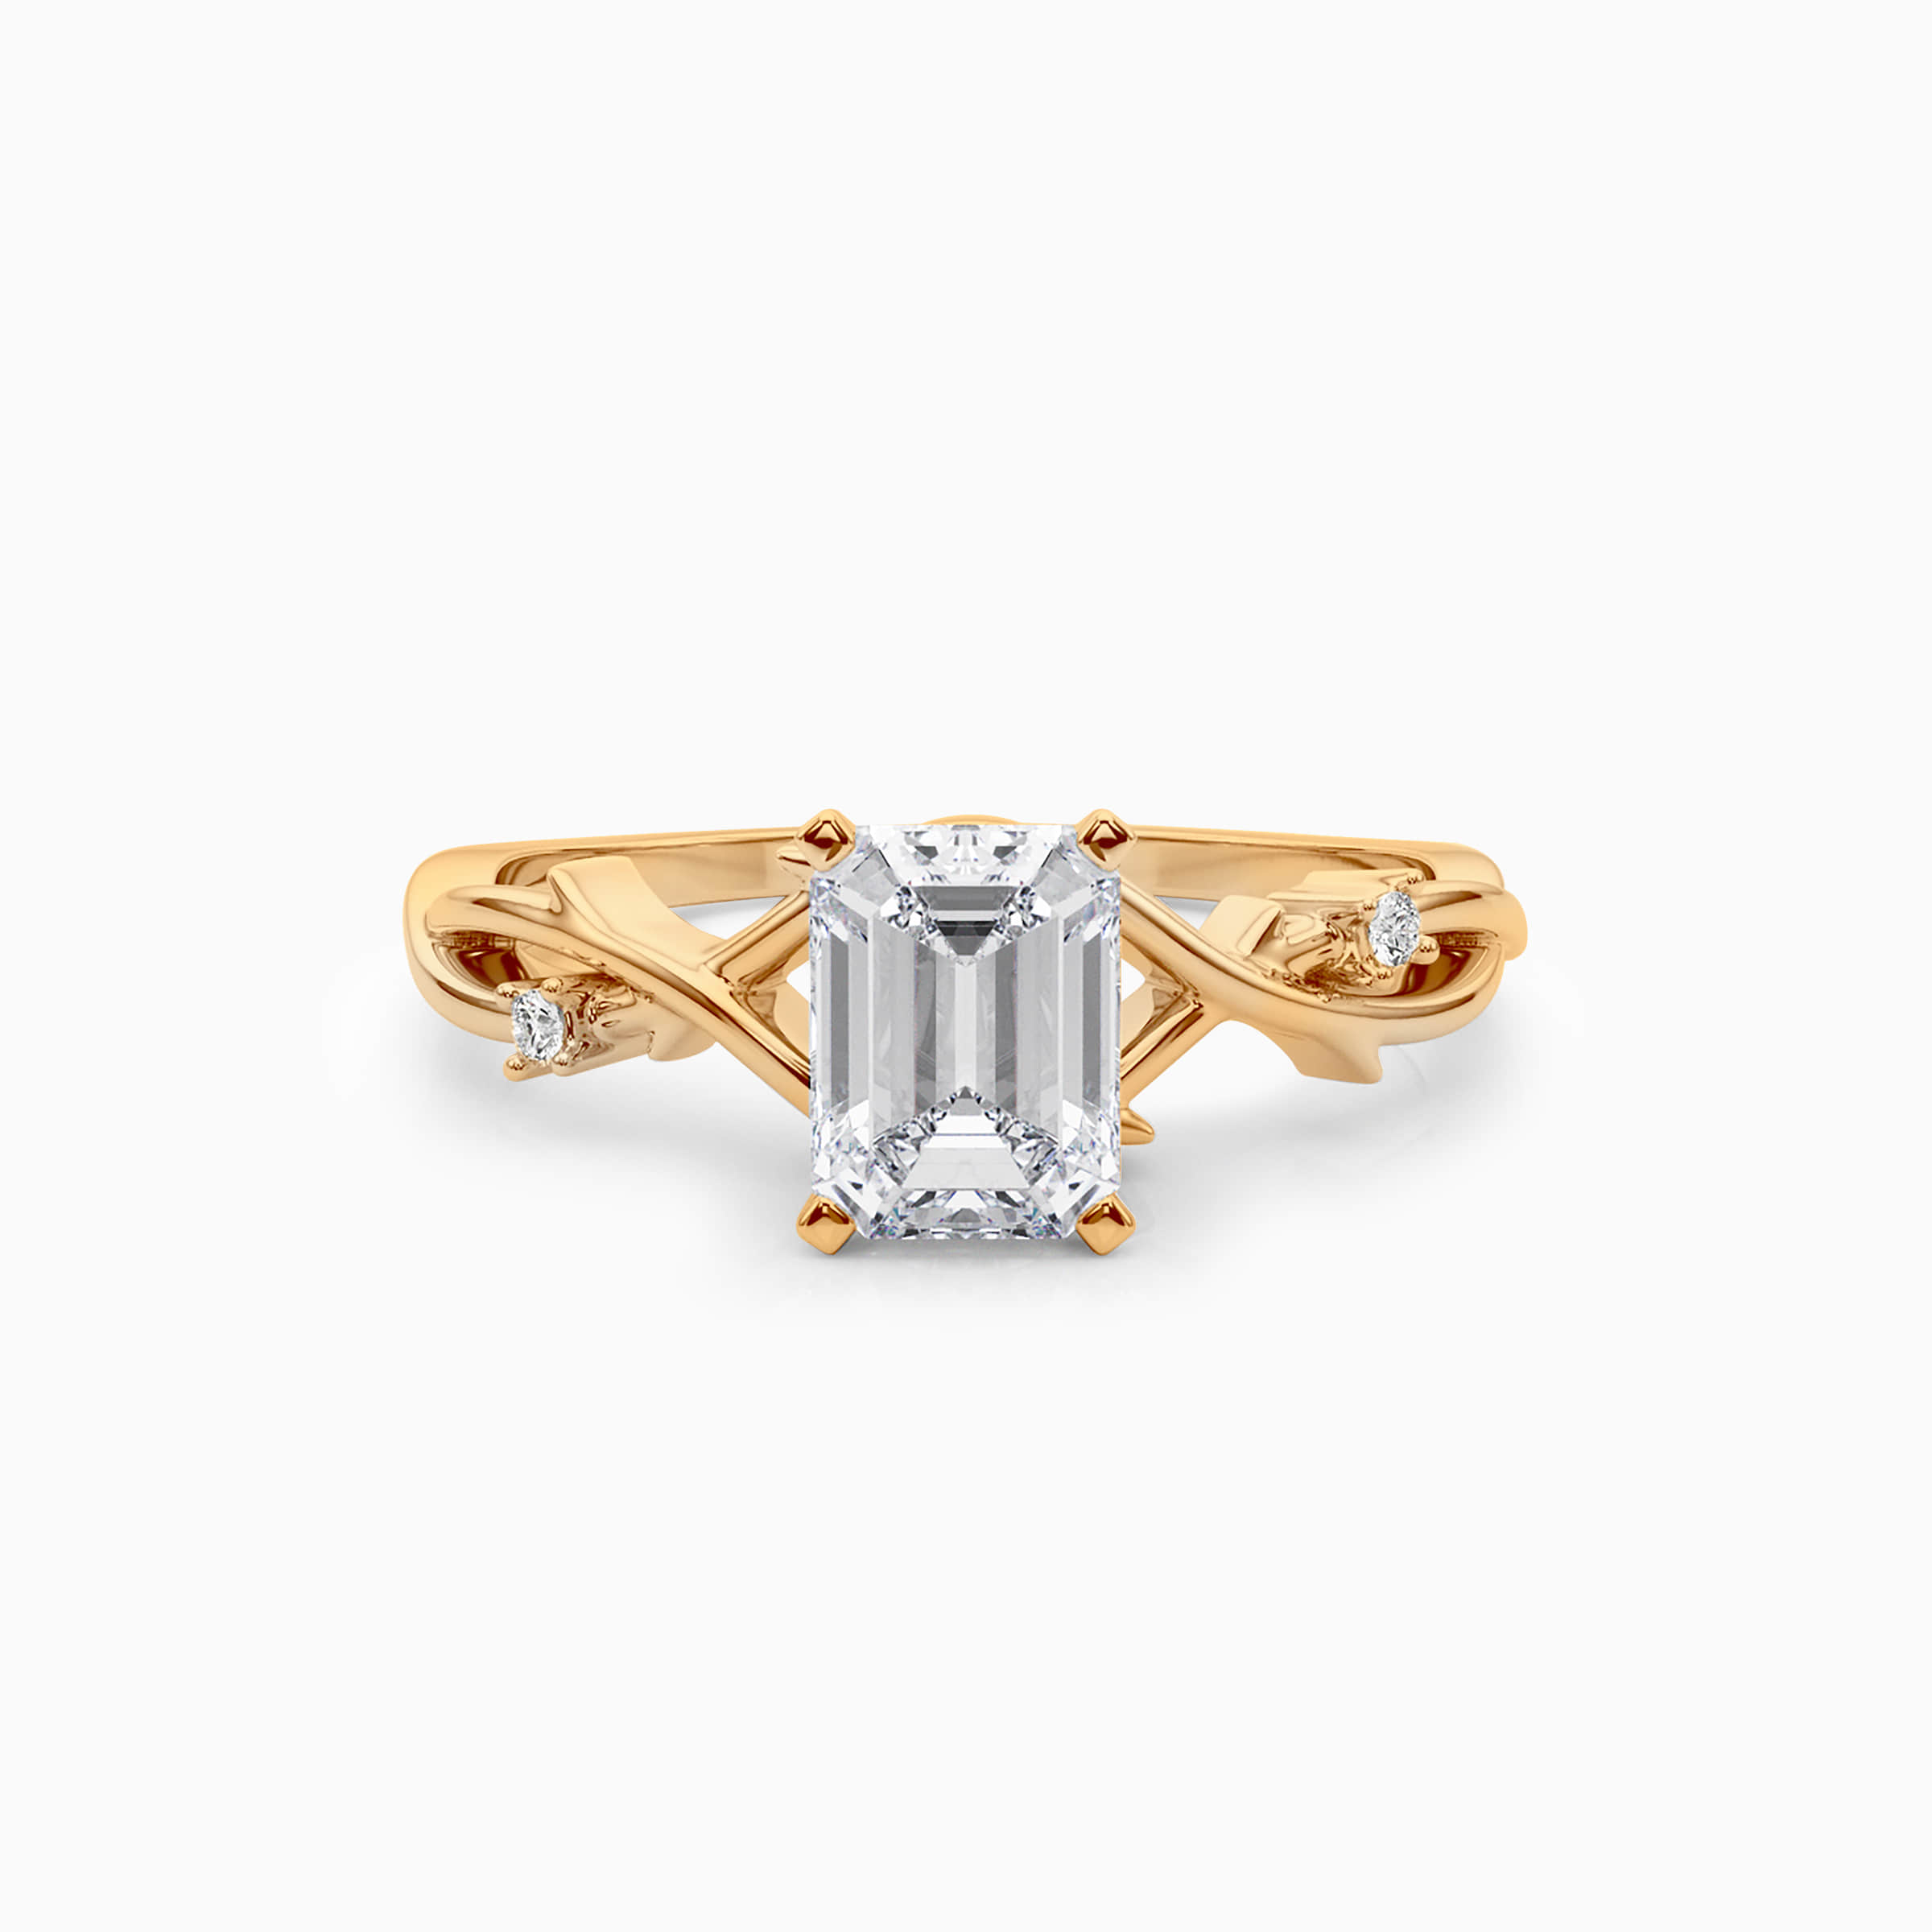 Darry Ring emerald cut engagement ring with twisted band in yellow gold